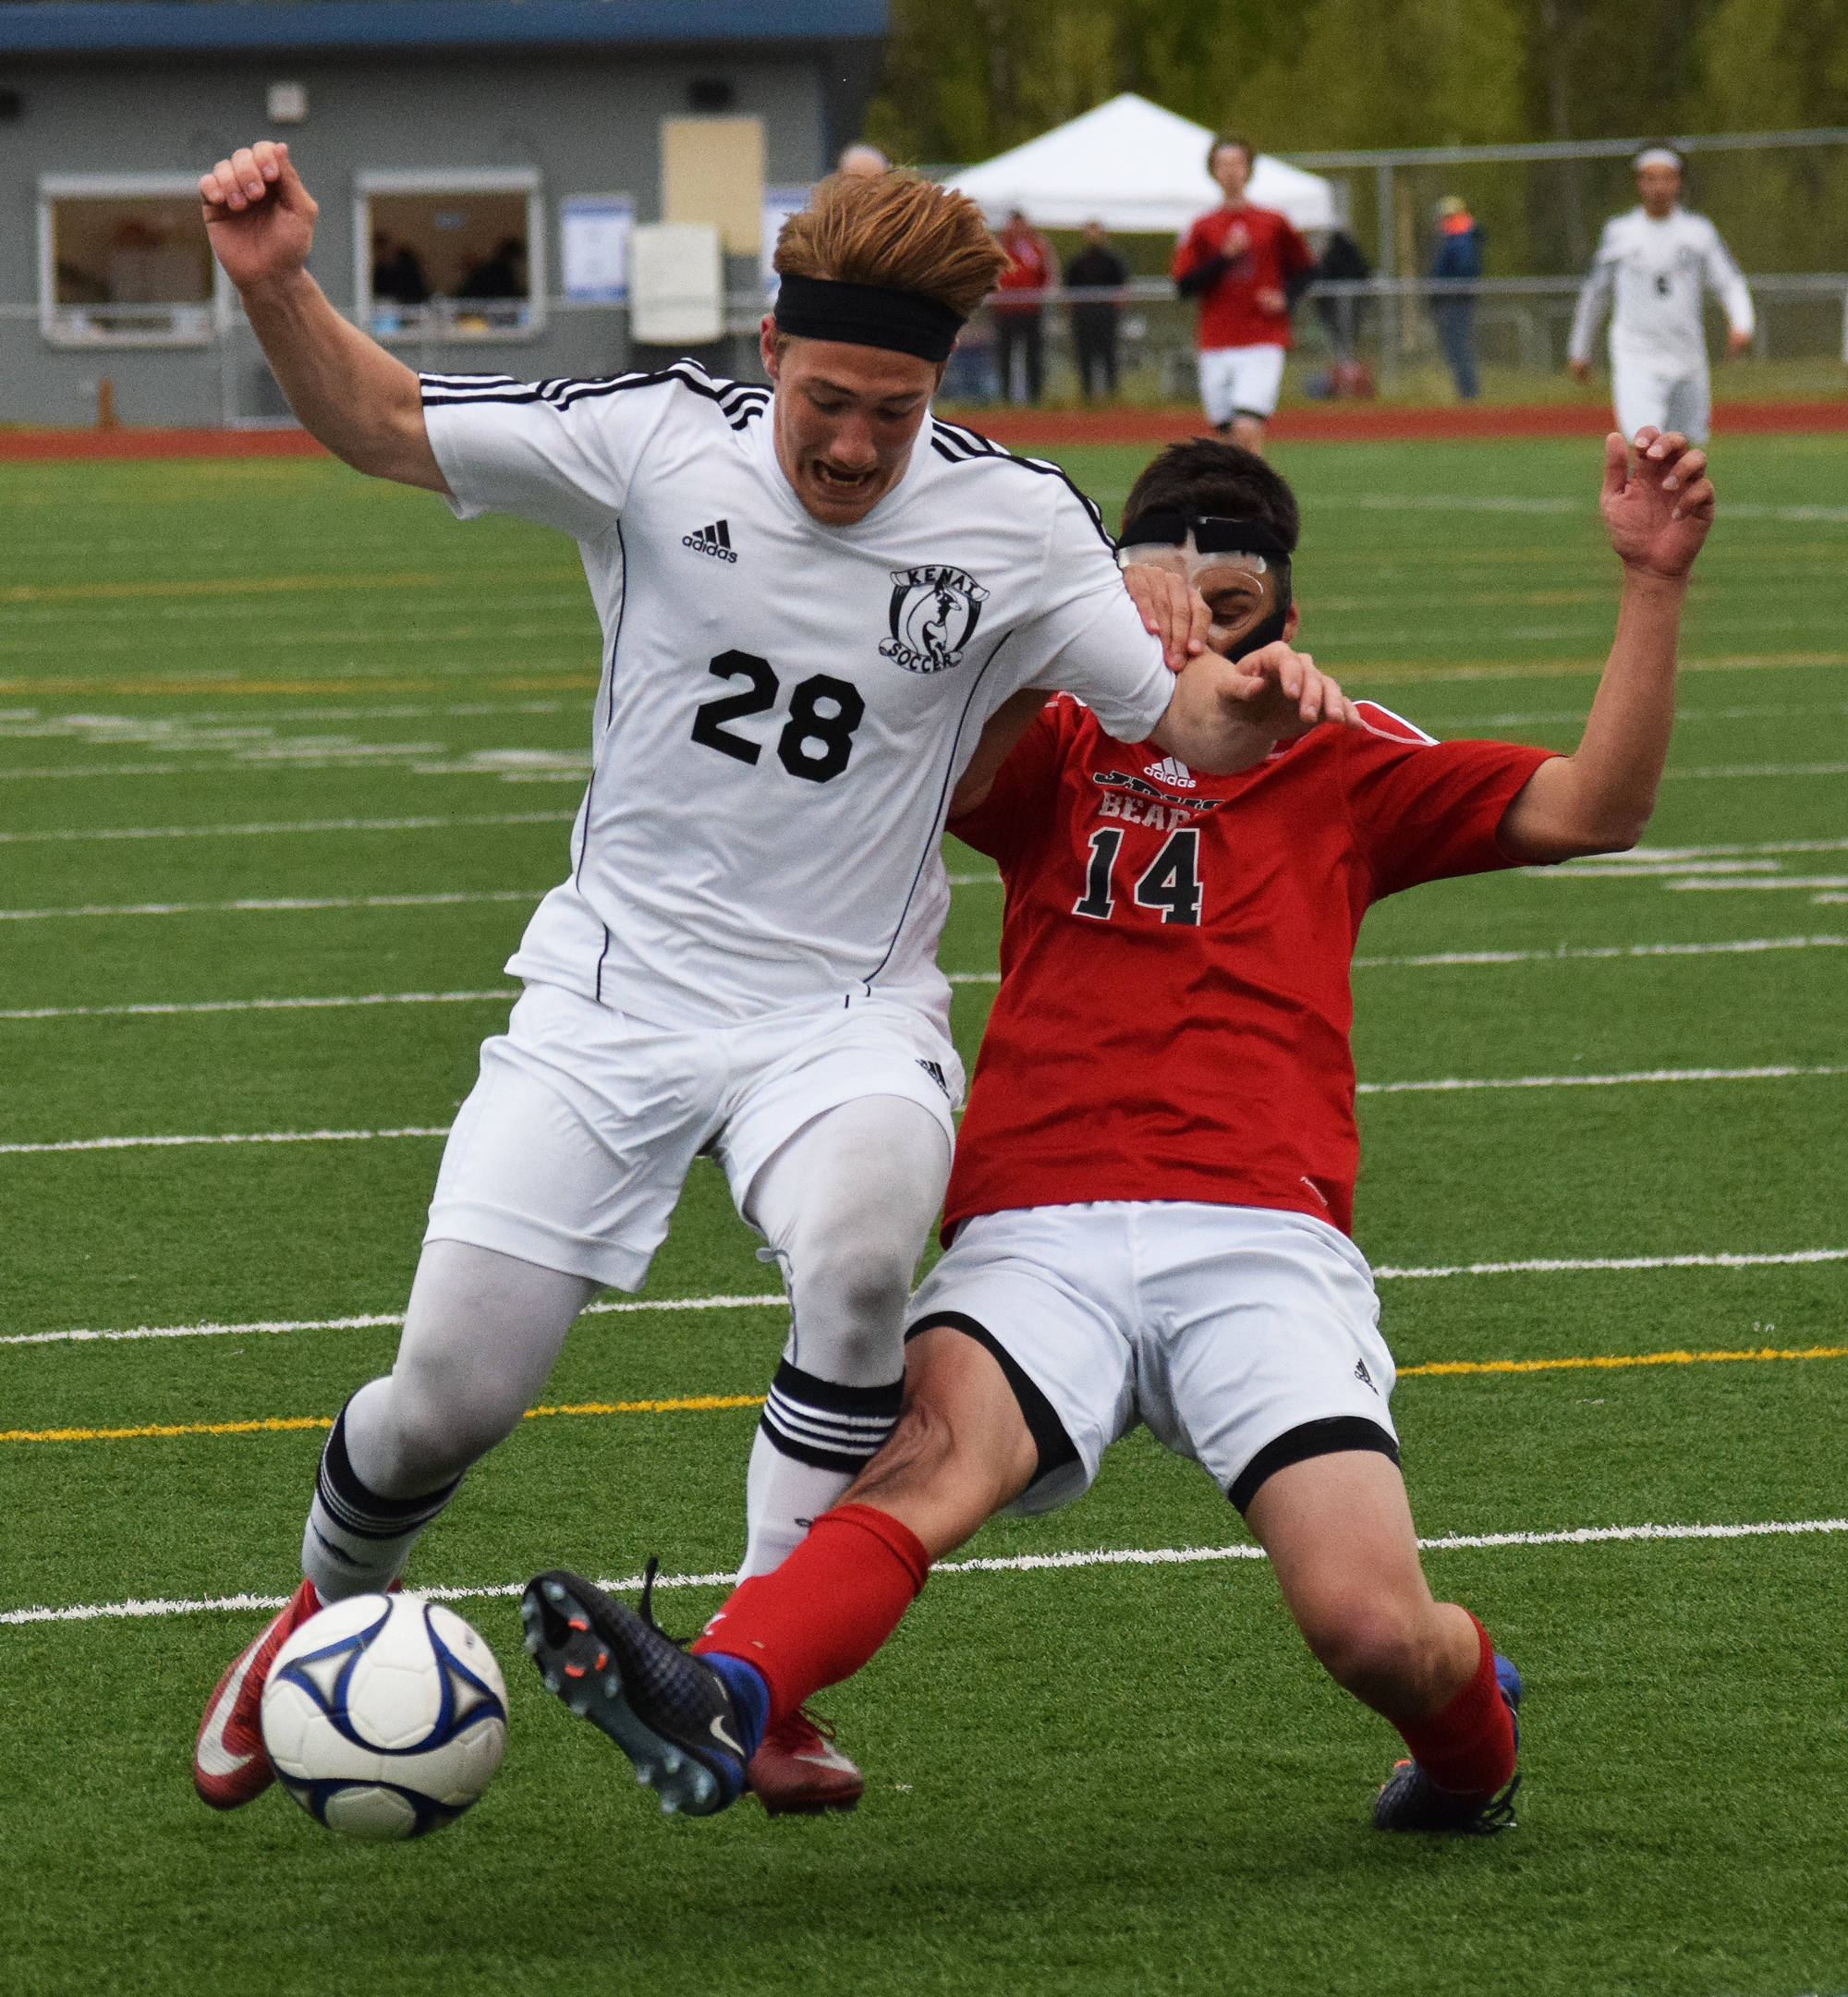 Kenai Central’s Rykker Riddall (28) and Juneau-Douglas’ Ben Undurraga battle for possession in a quarterfinal meeting Thursday at the state soccer tournament at Eagle River High School. (Photo by Joey Klecka/Peninsula Clarion)